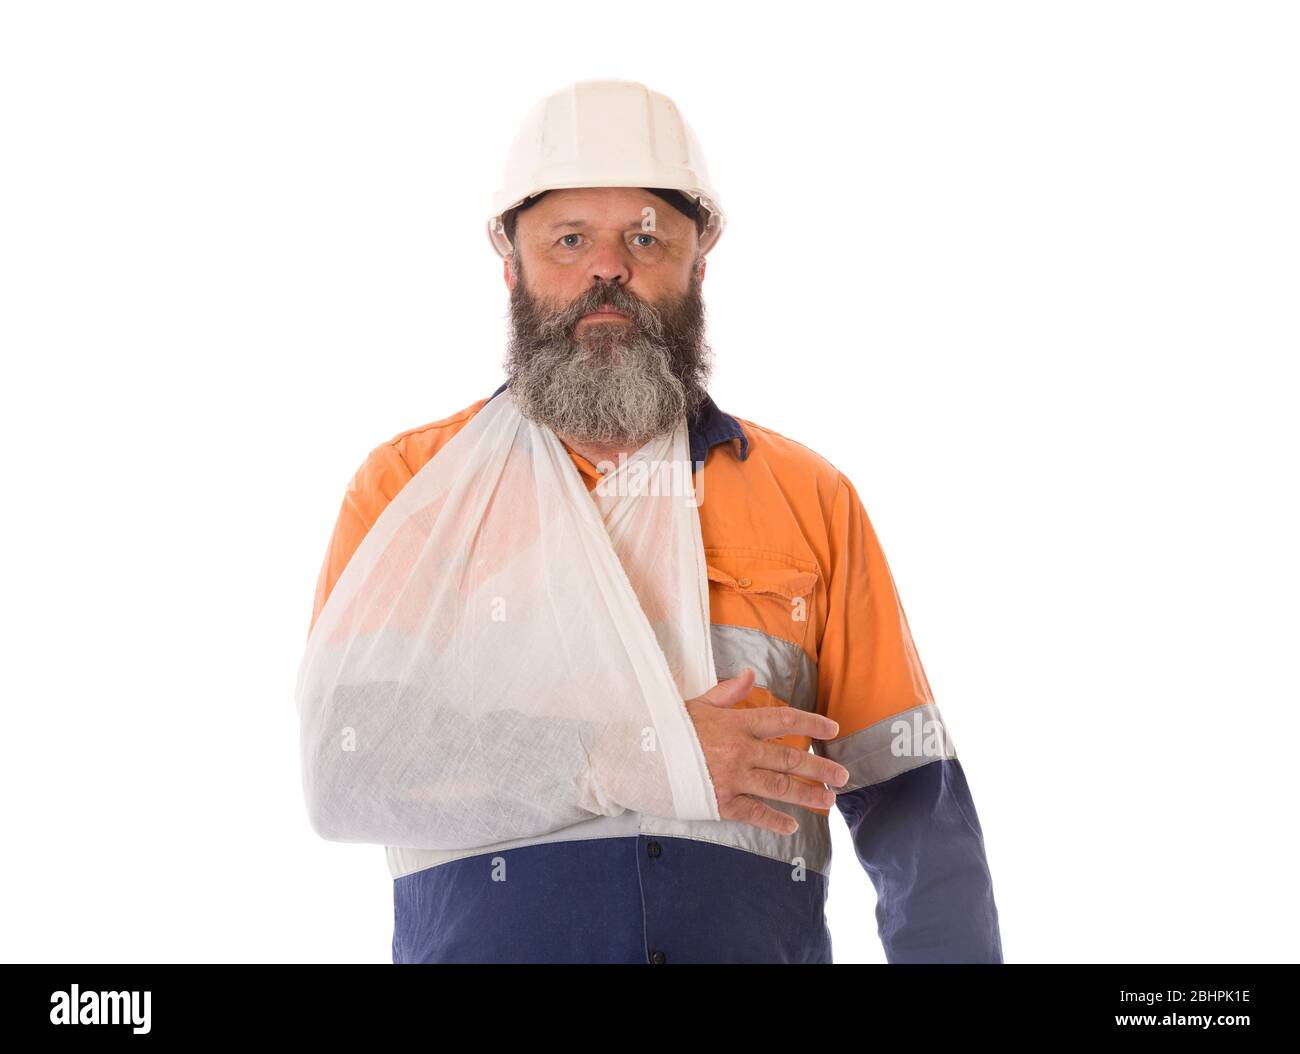 An industrial worker with arm in sling. Stock Photo